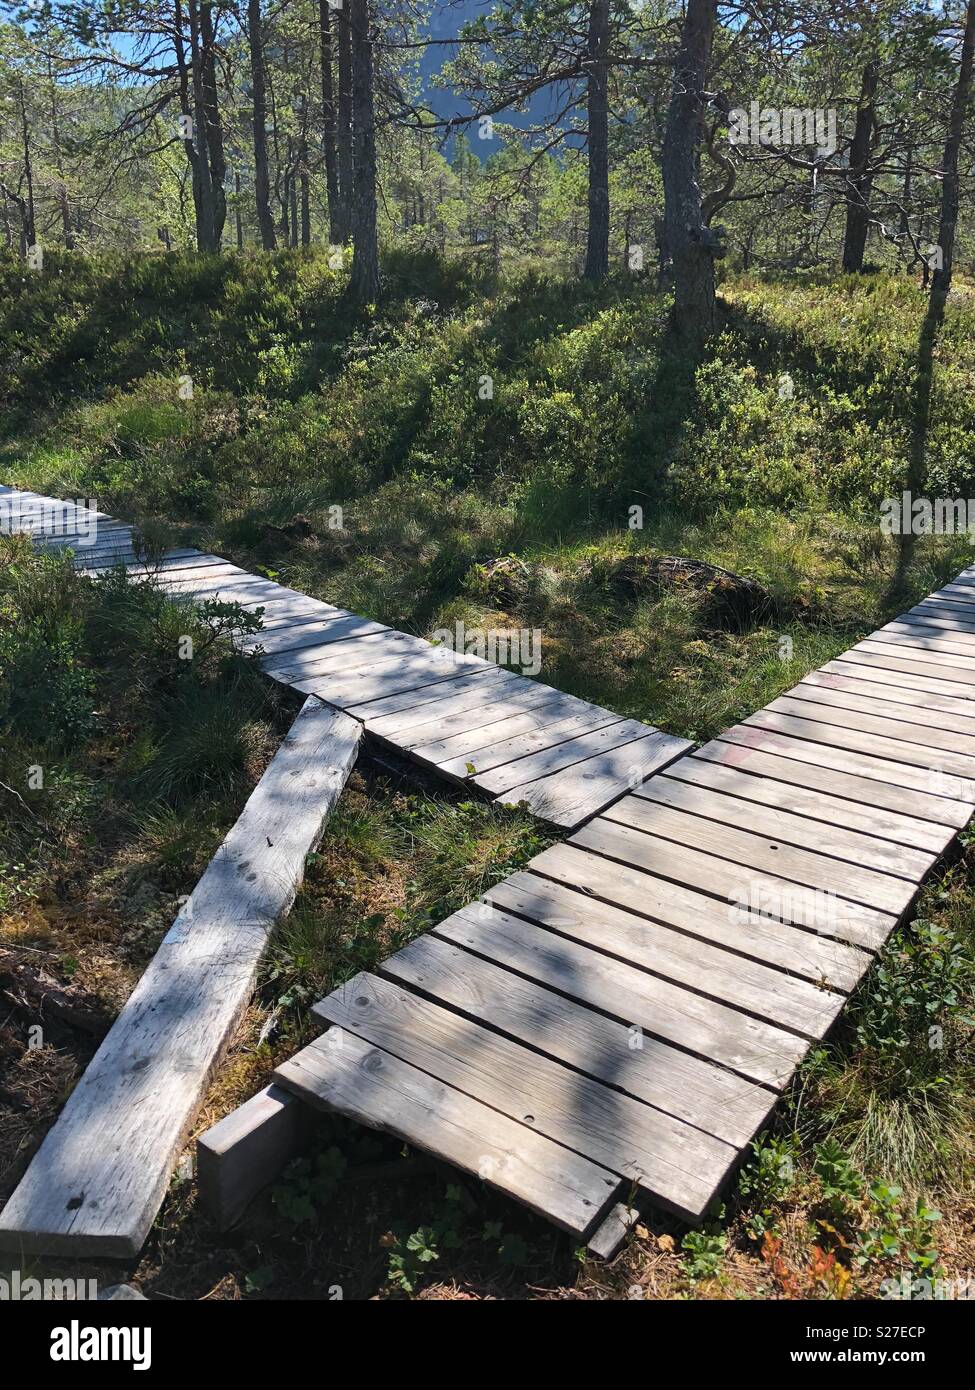 Wooden decking for erosion control in Norway Stock Photo